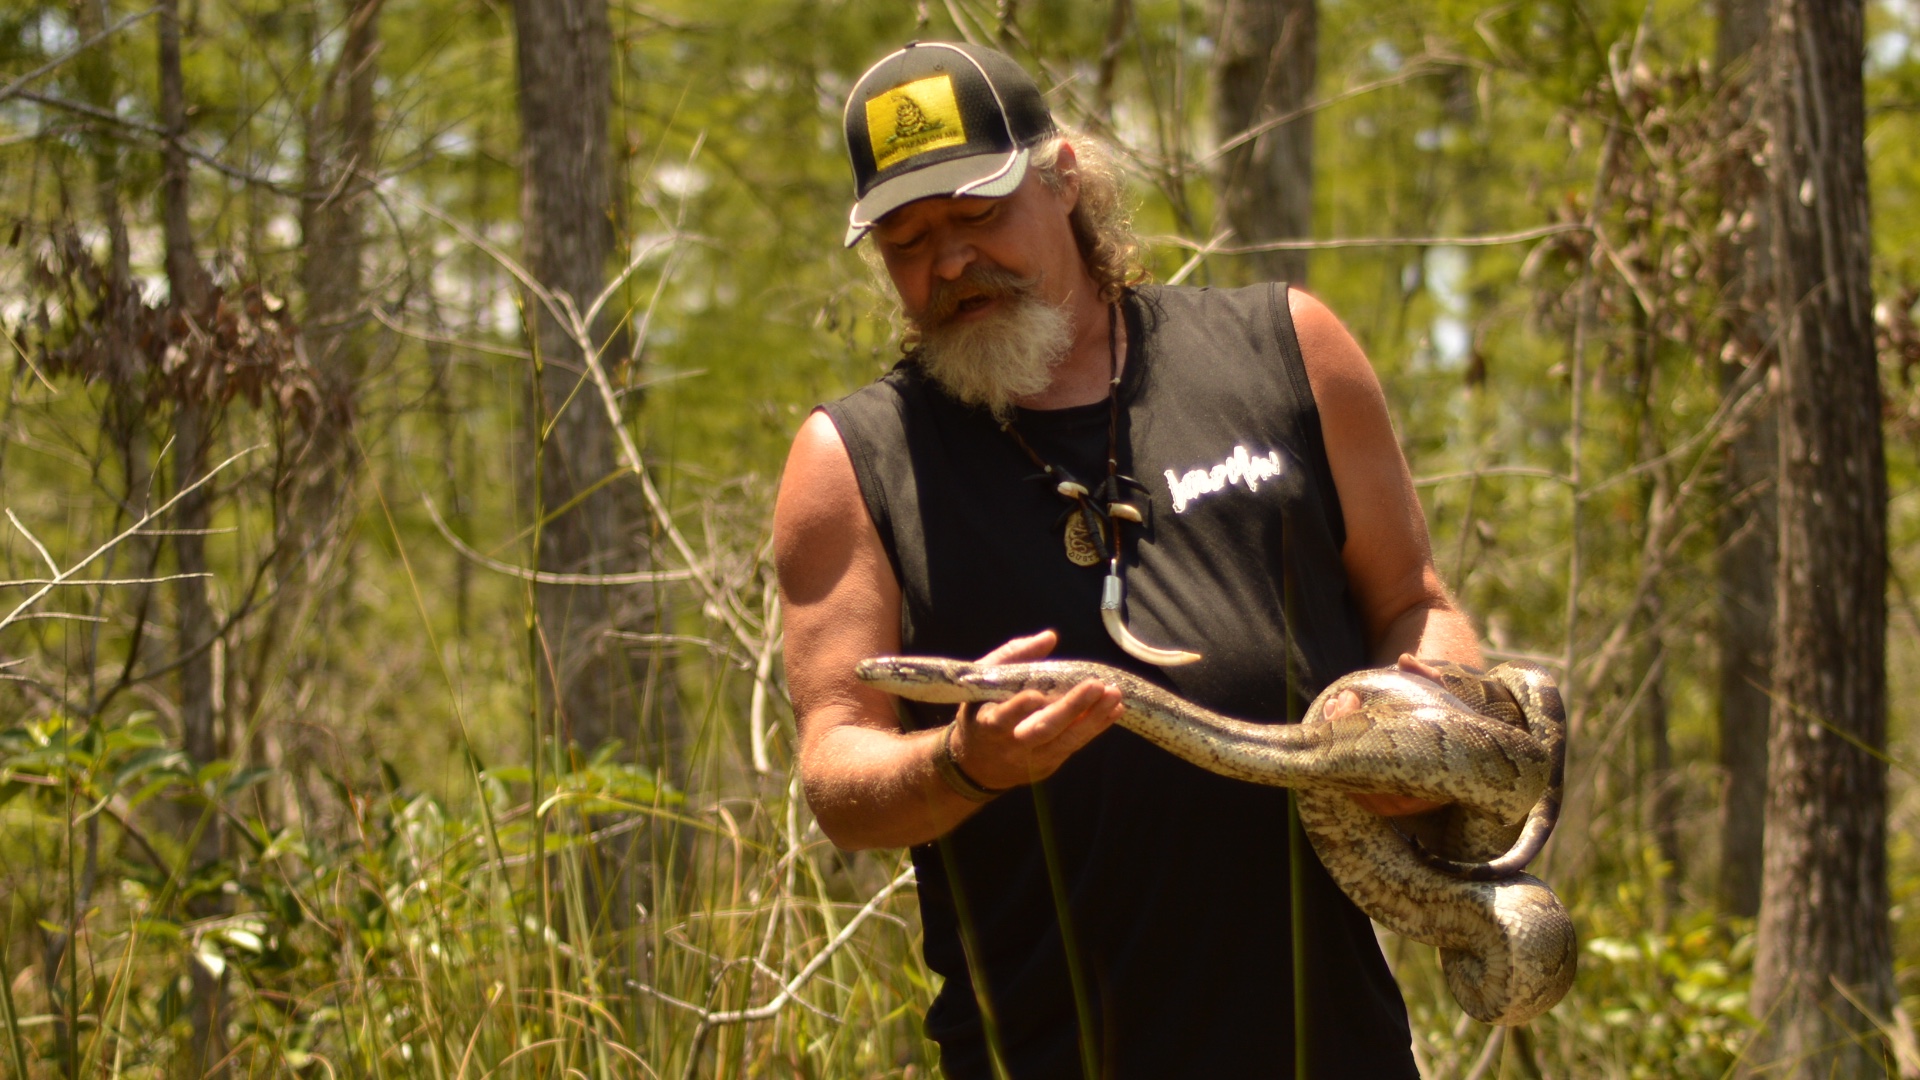 Dusty Crum Swamp People Serpent Invasion Cast HISTORY Channel